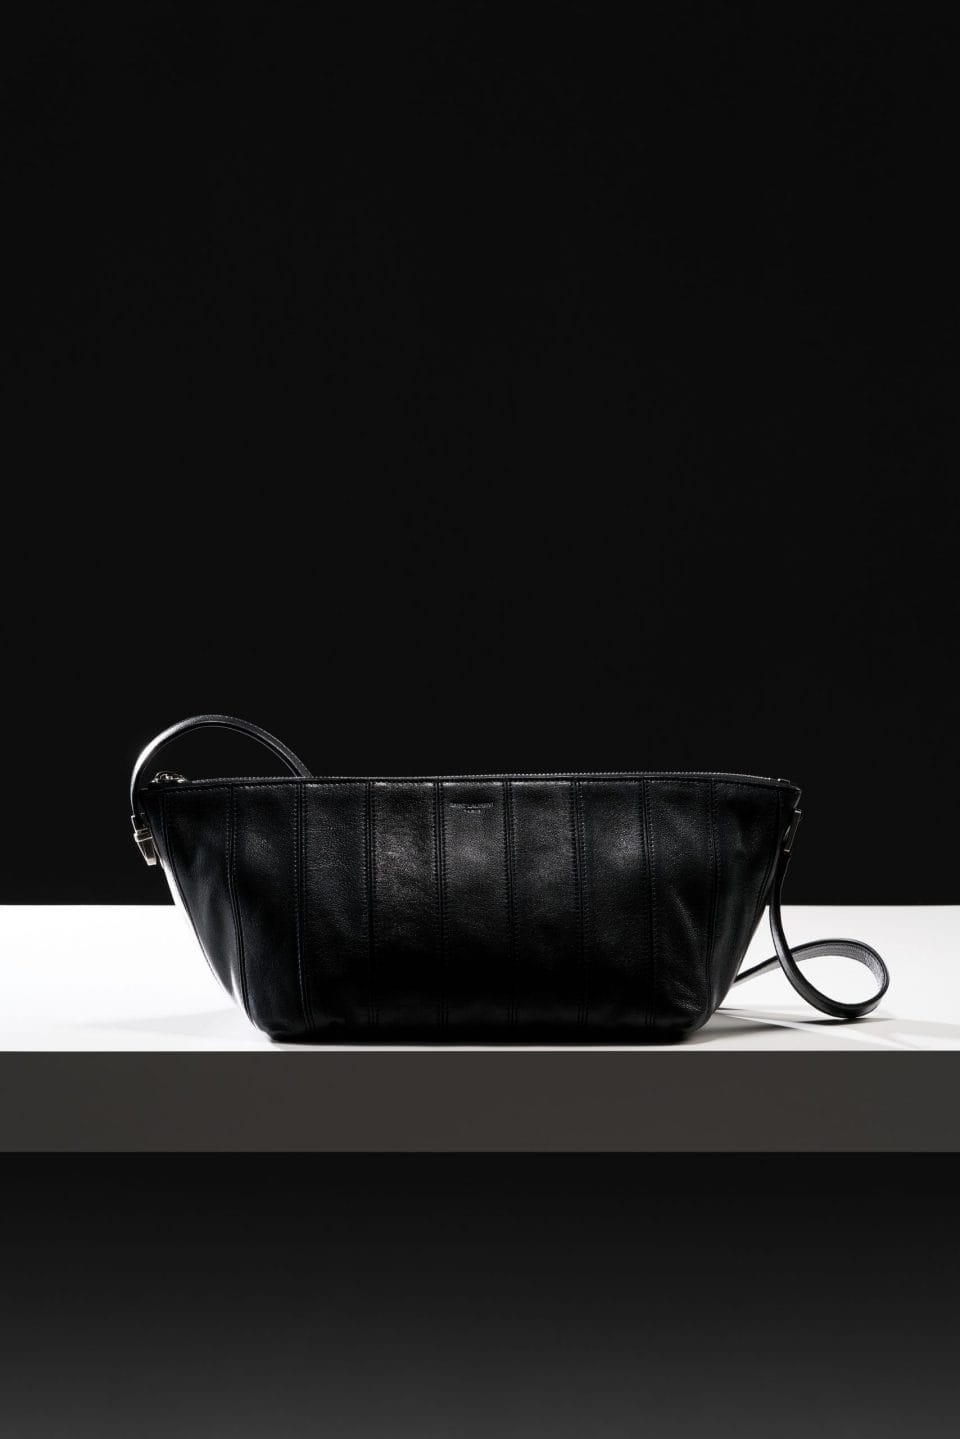 The Saint Laurent Accessories Of the Season Are Objects At  A Distance